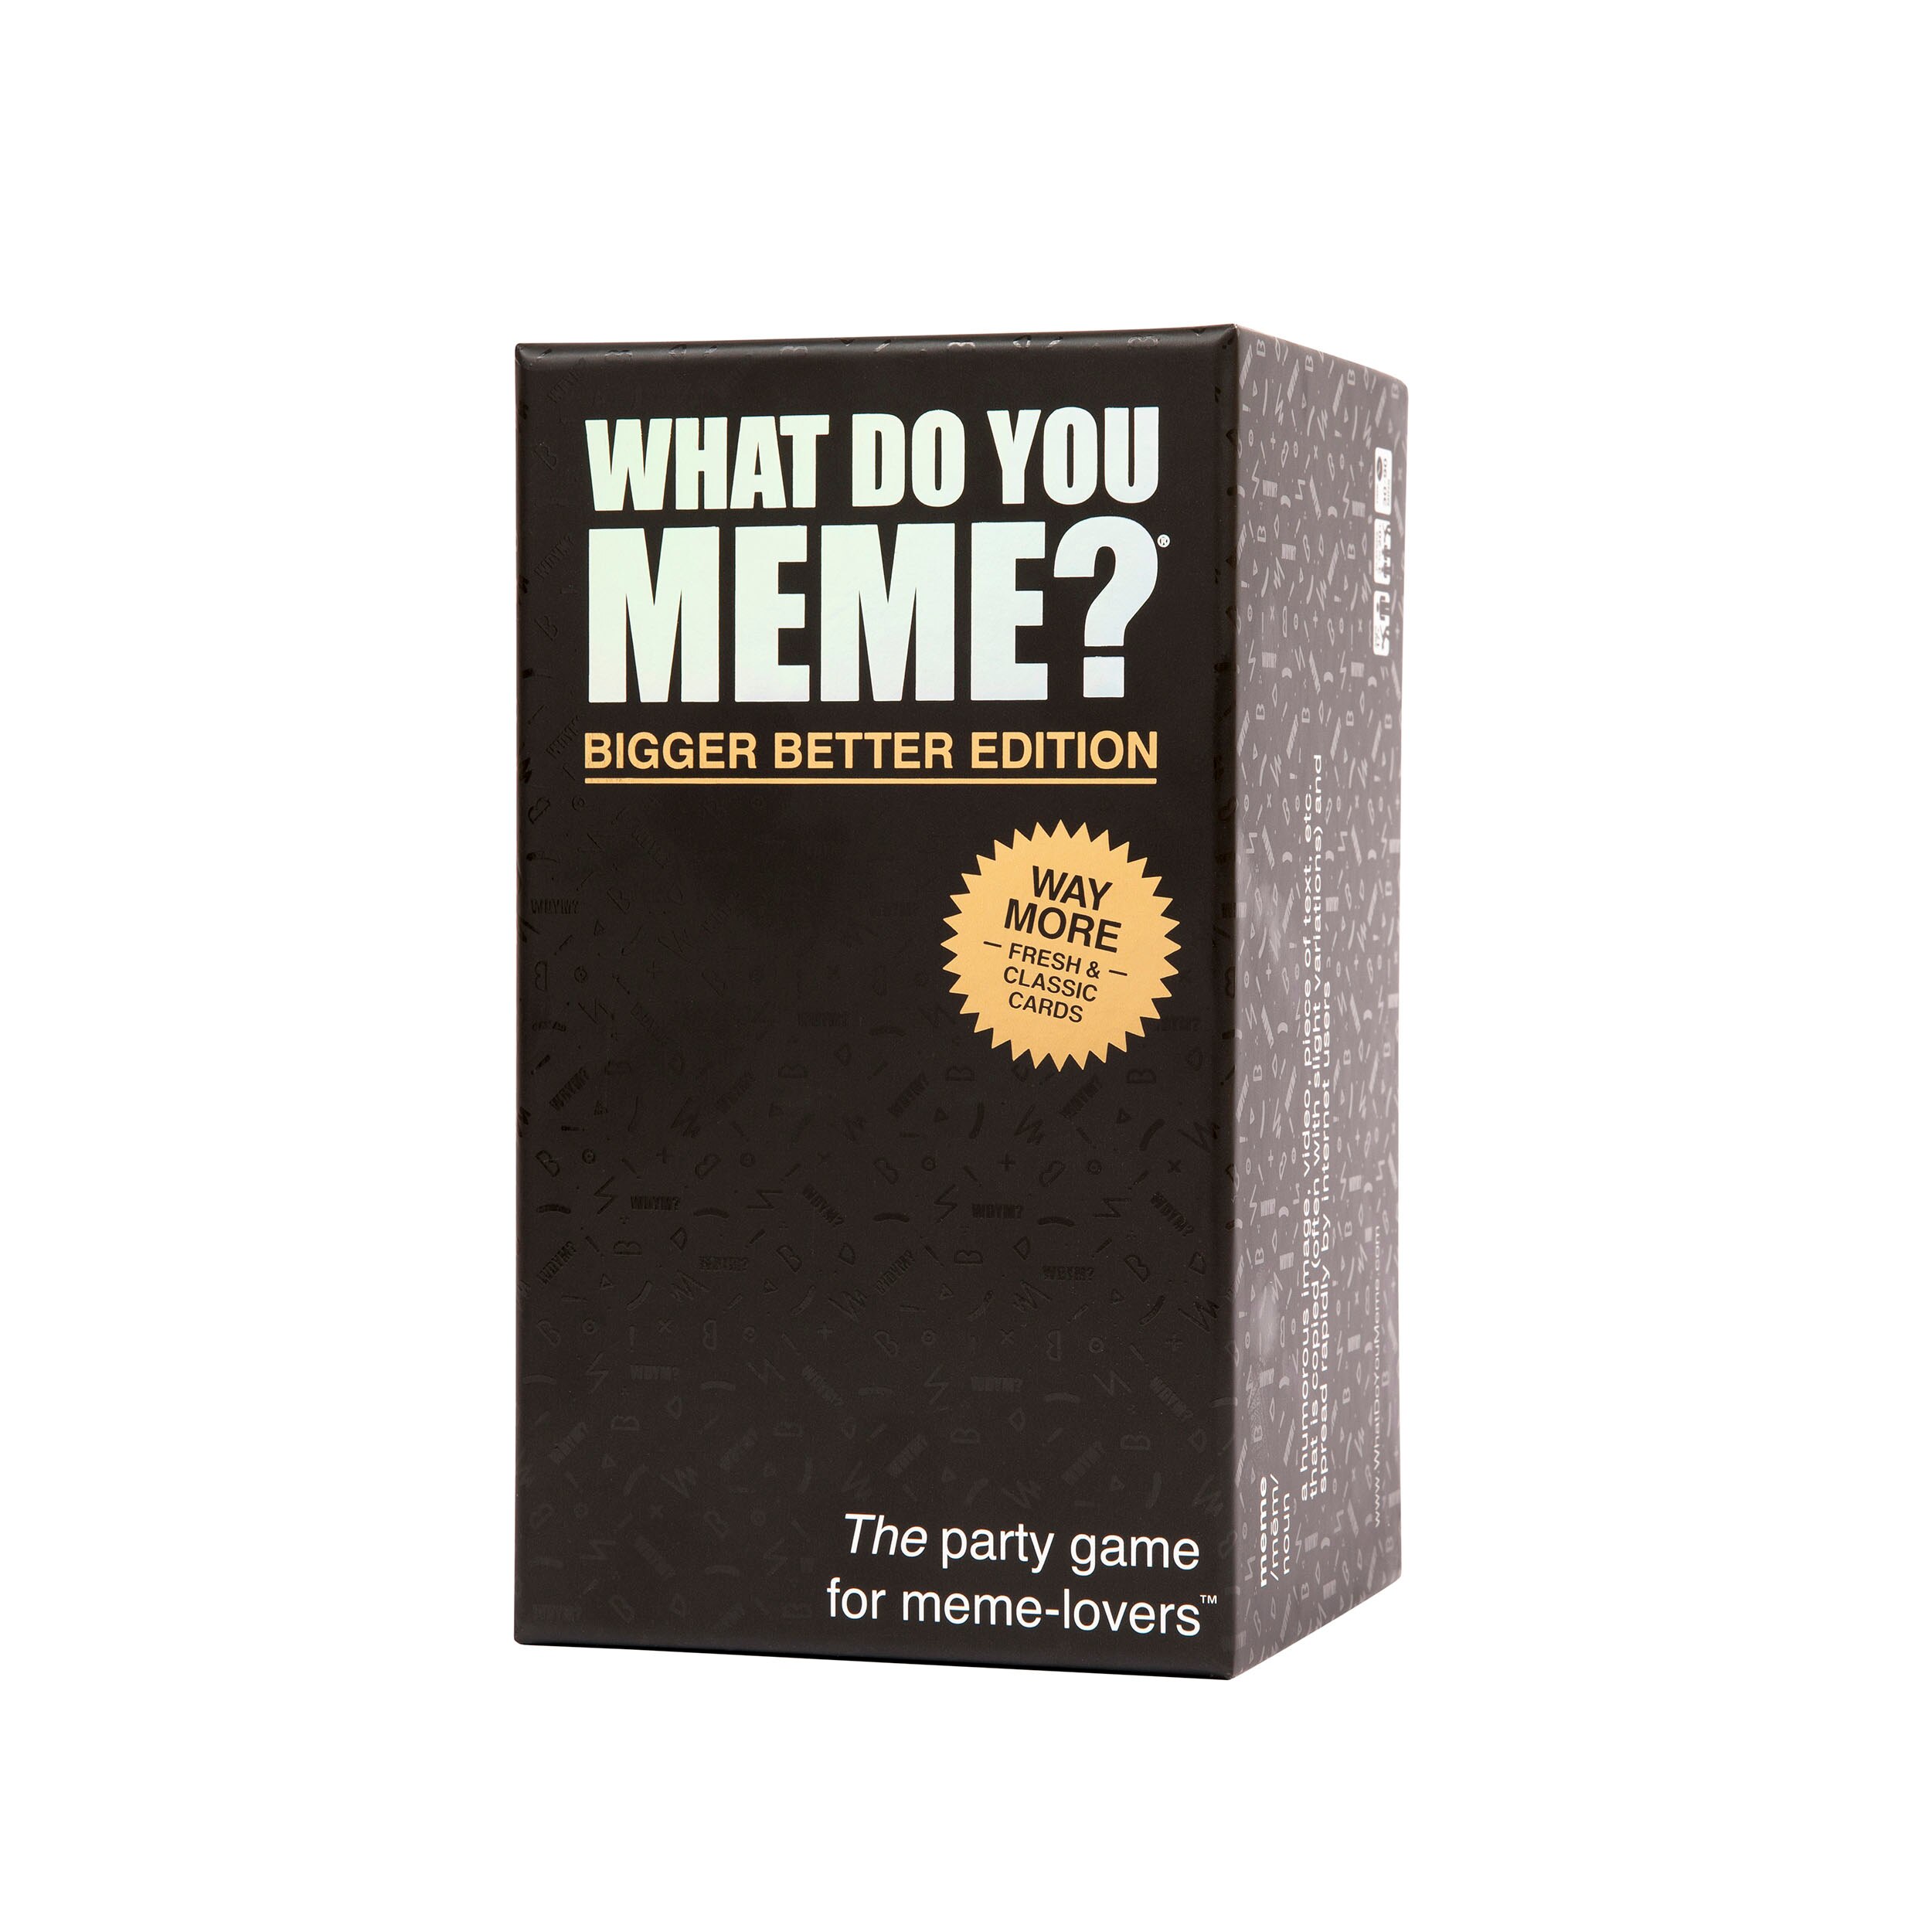 What Do You Meme Core Game - NEW Black Box: Bigger Better Edition